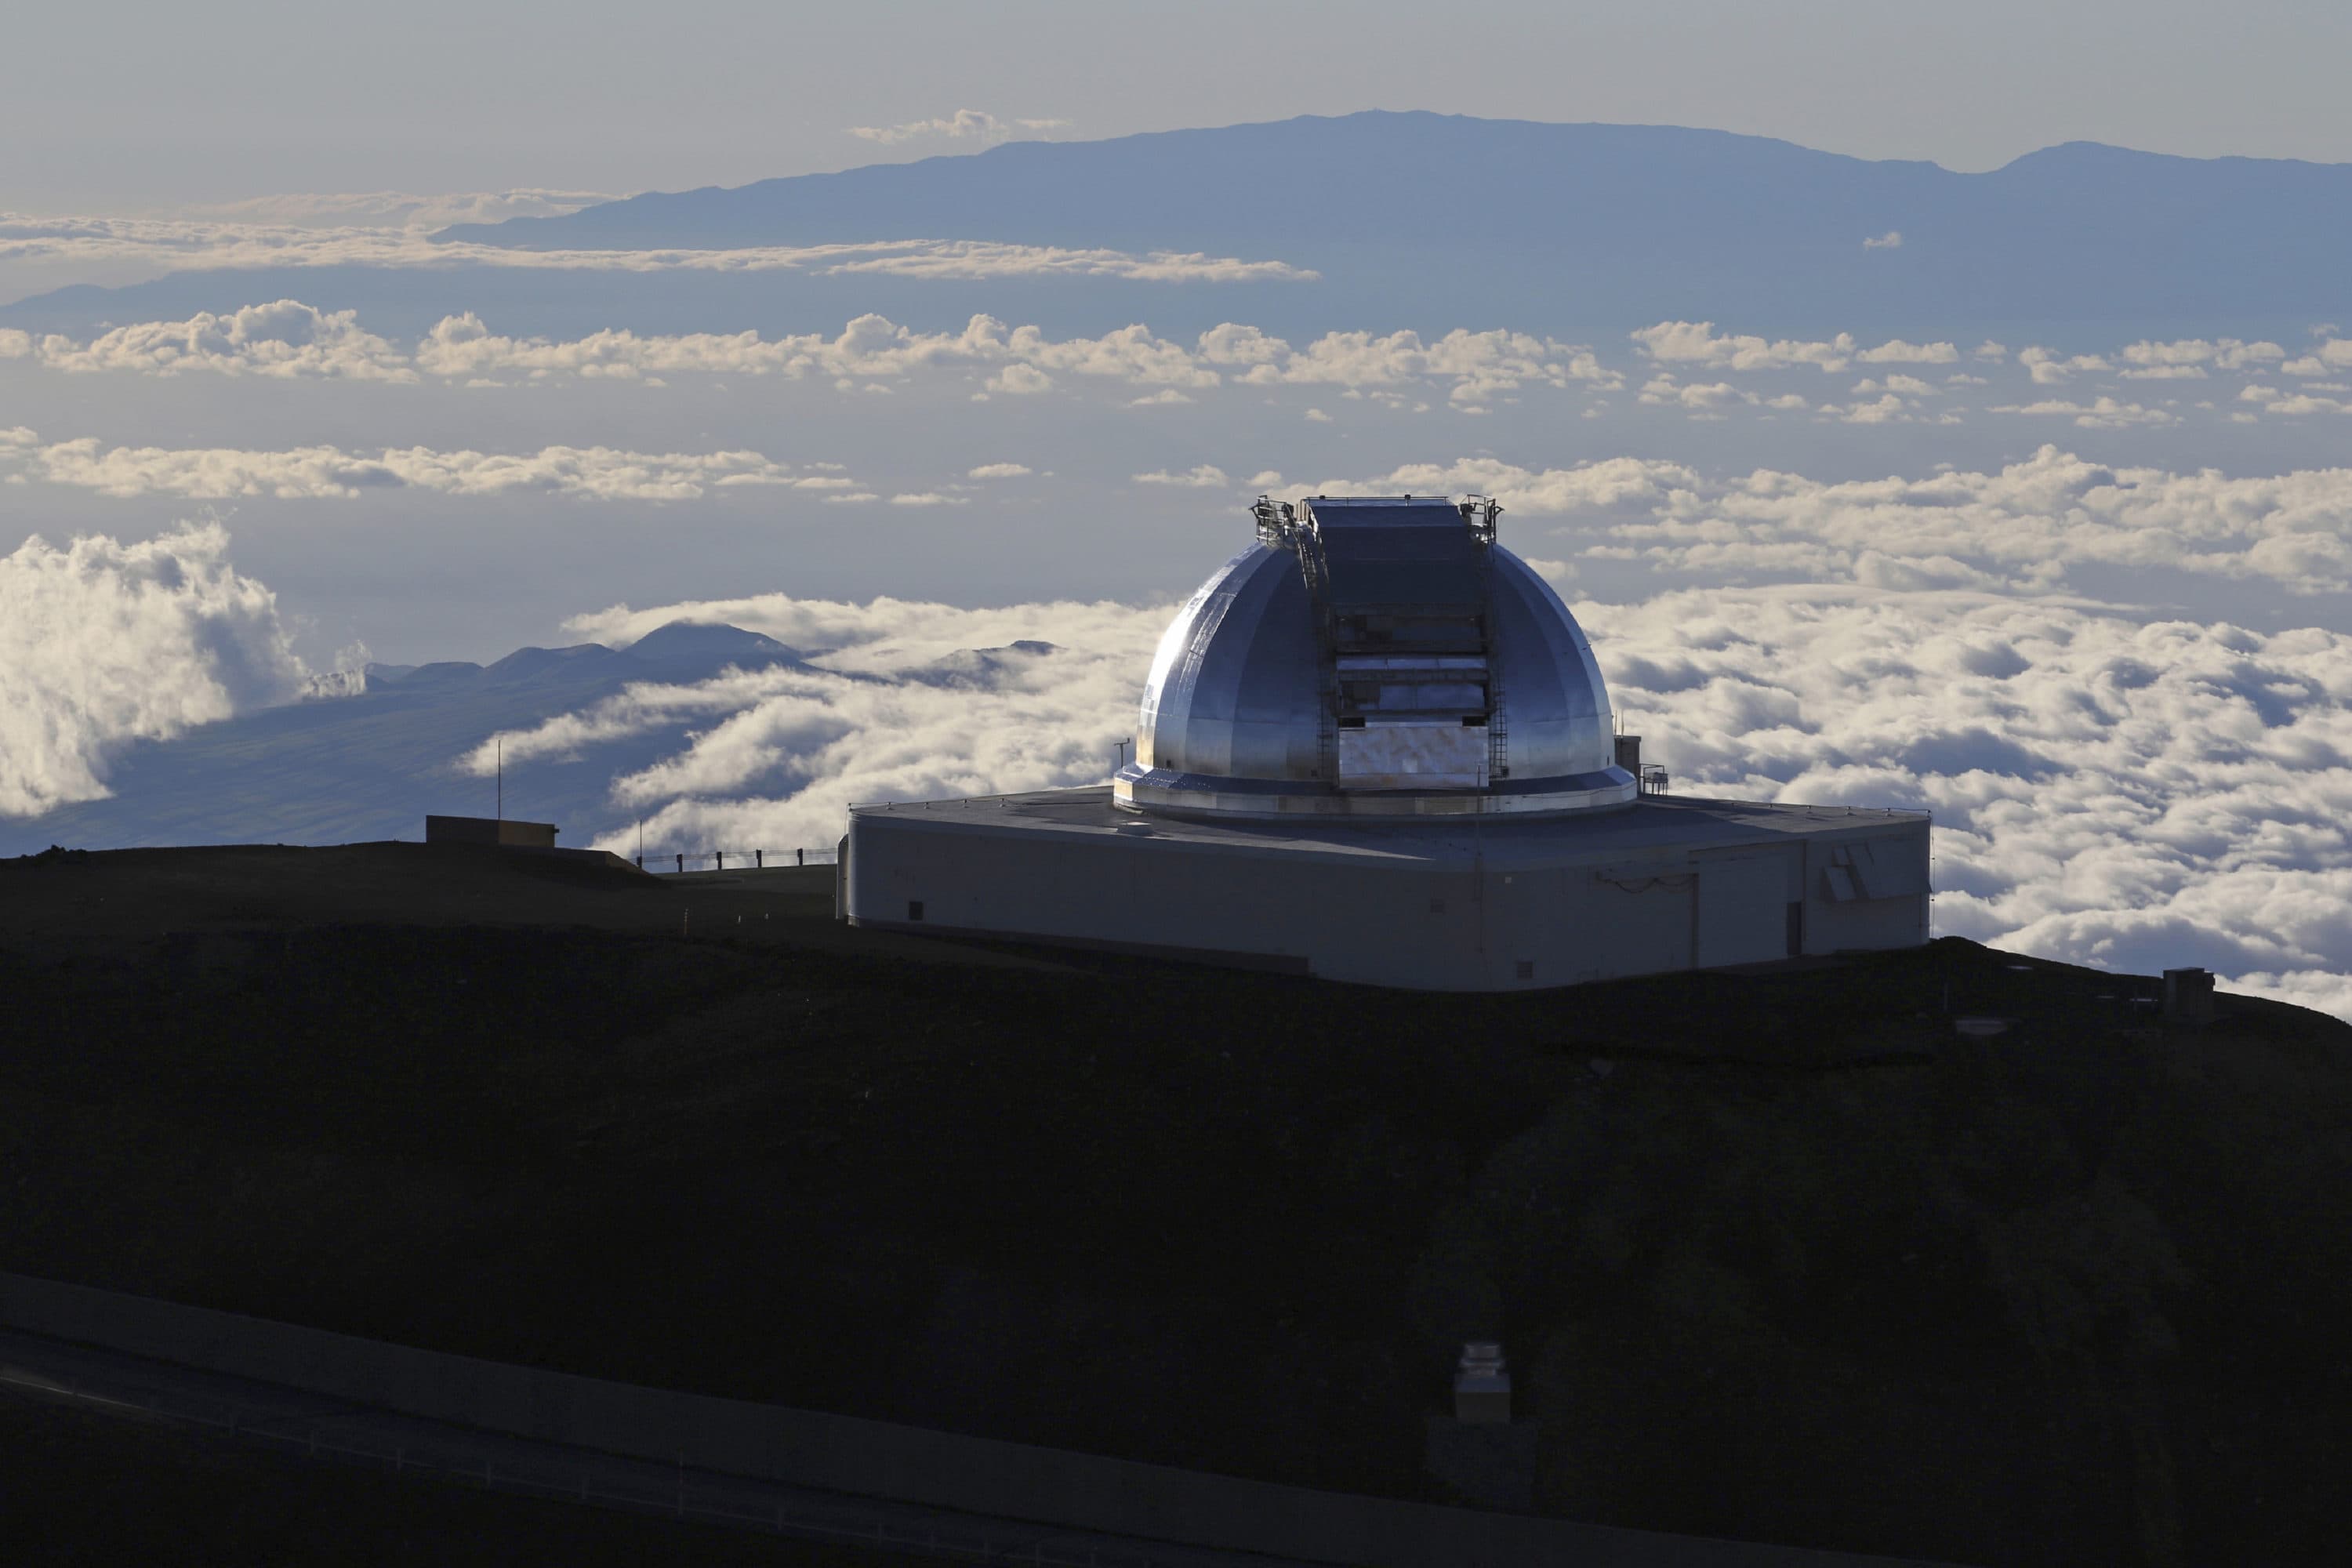 This July 14, 2019 image shows a telescope at the summit of Mauna Kea, Hawaii's highest mountain.  (Caleb Jones/AFP)